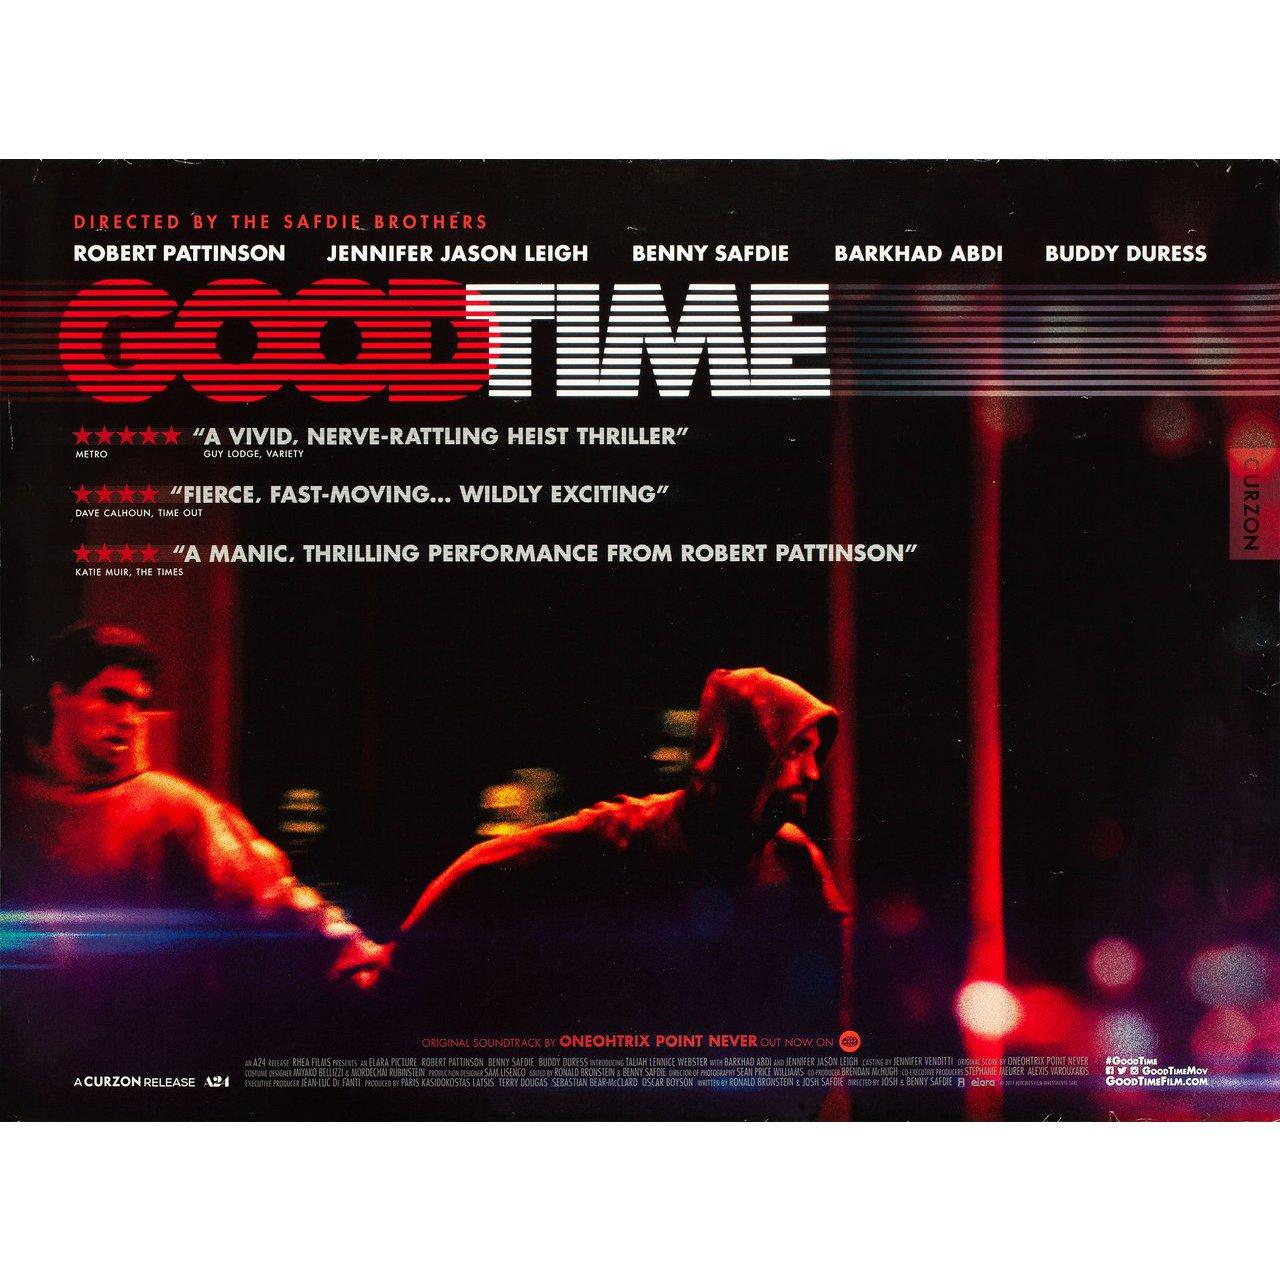 Original 2017 British quad poster for the film Good Time directed by Benny Safdie / Josh Safdie with Robert Pattinson / Benny Safdie / Taliah Webster / Jennifer Jason Leigh. Very Good-Fine condition, rolled. Please note: the size is stated in inches